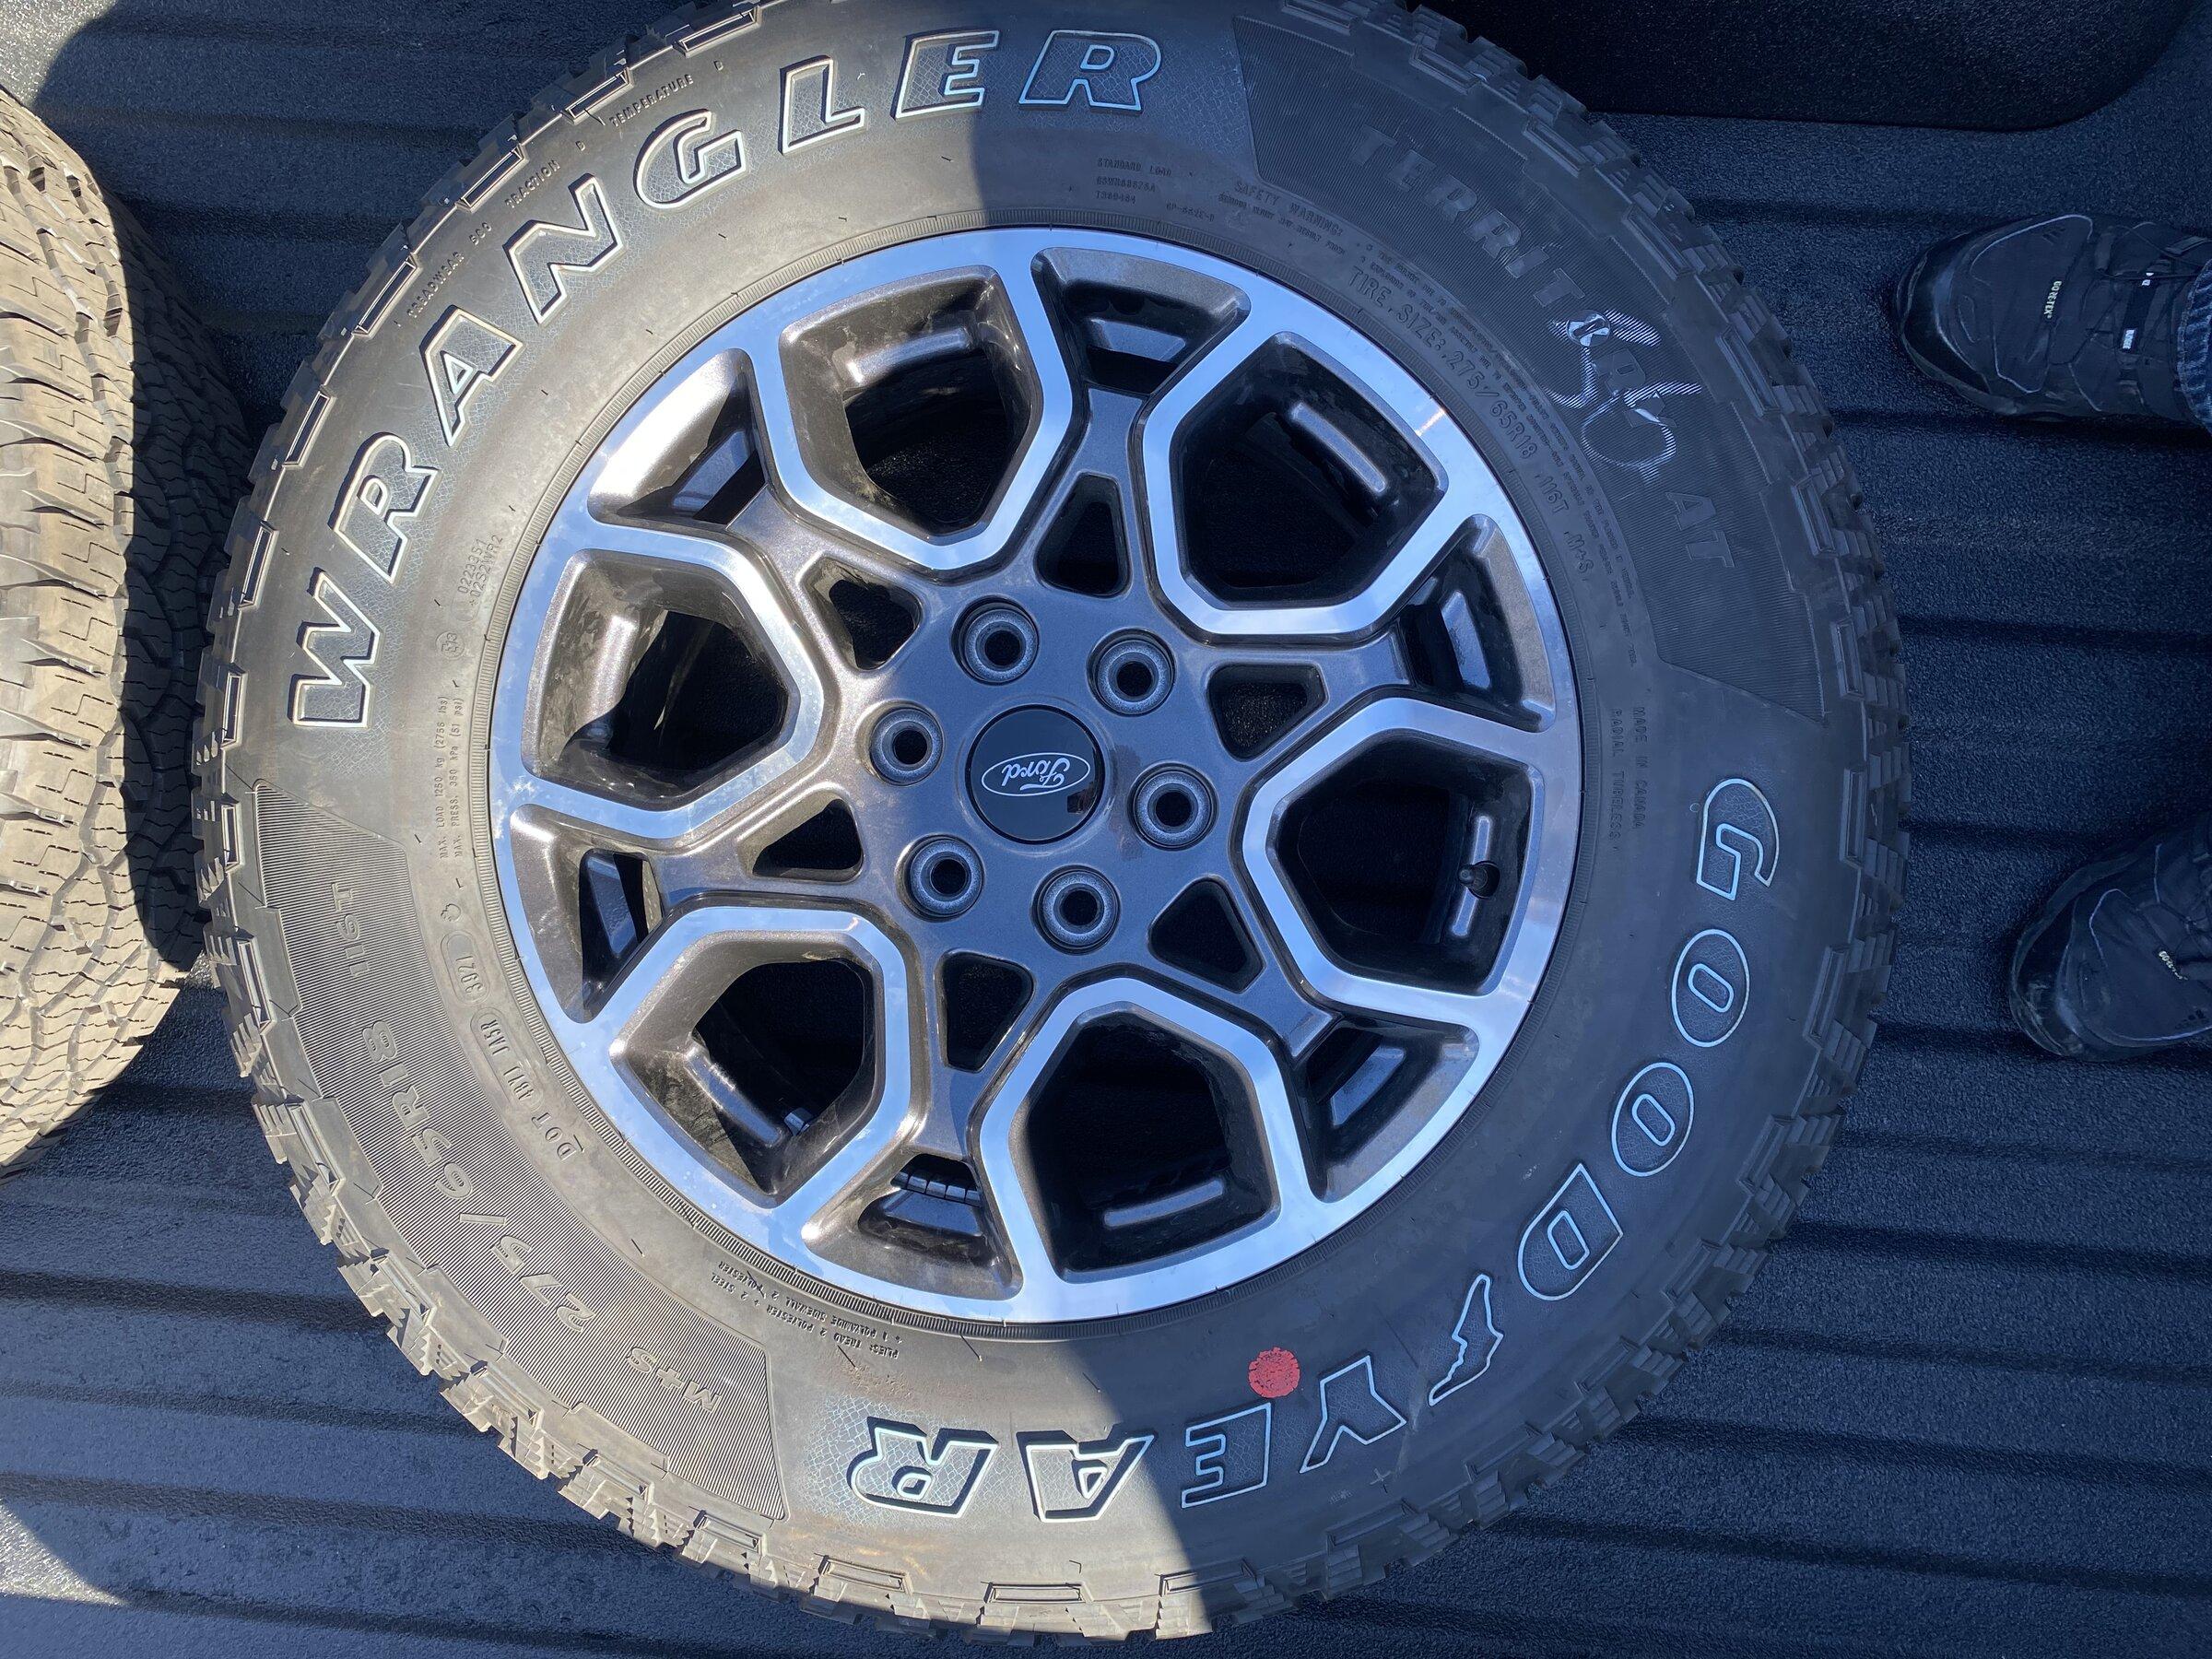 Ford F-150 Lightning Factory take offs 18” sport rims and tires with 11 miles 1B650551-C25A-4166-97D5-5F6CDCF6EB1E